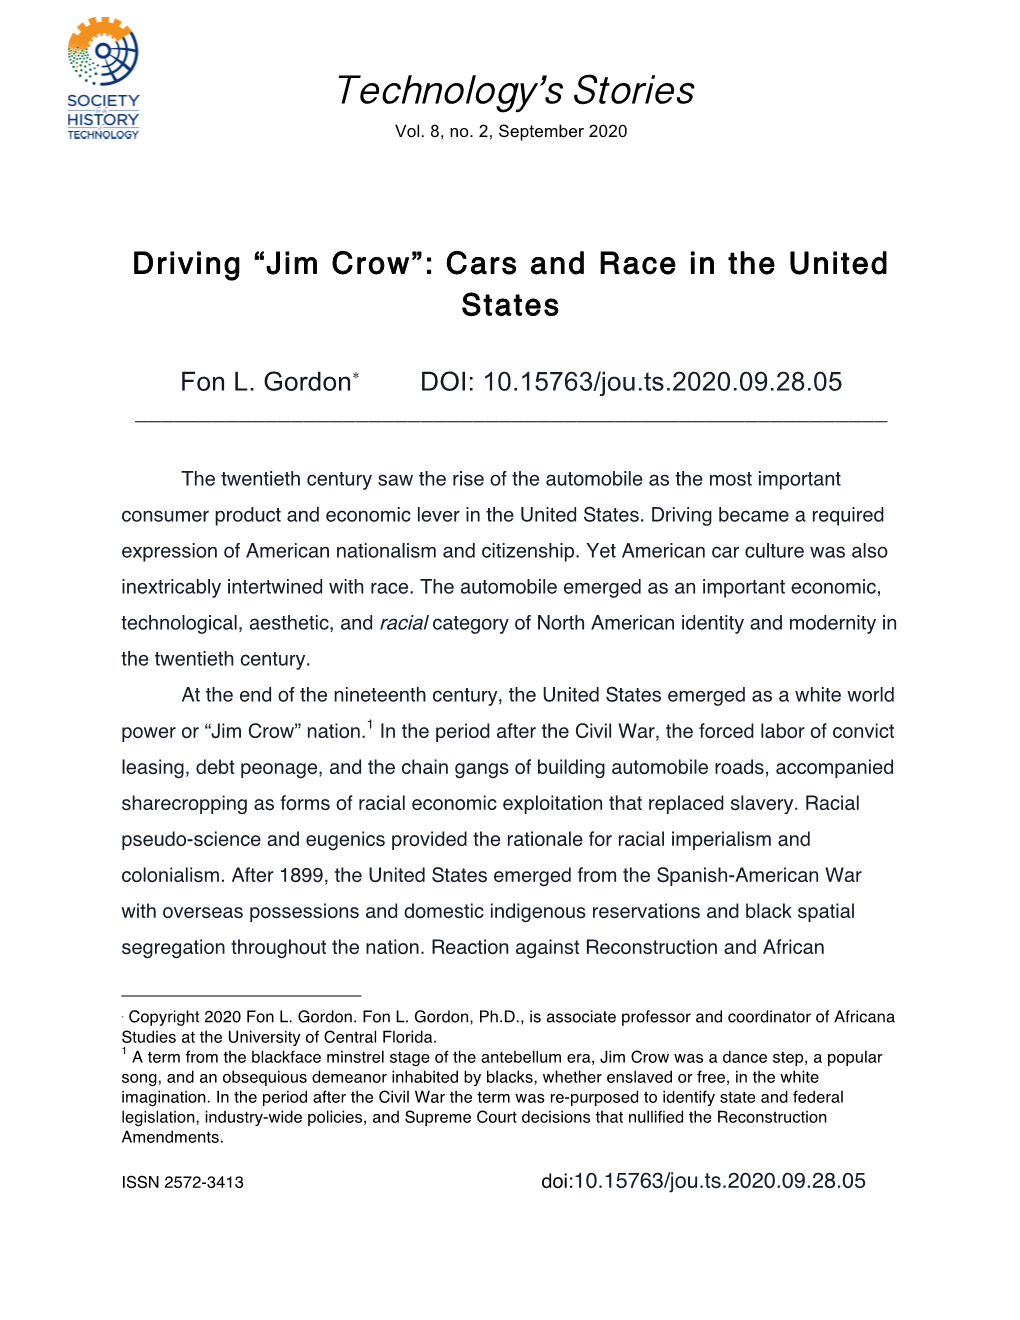 Jim Crow”: Cars and Race in the United States